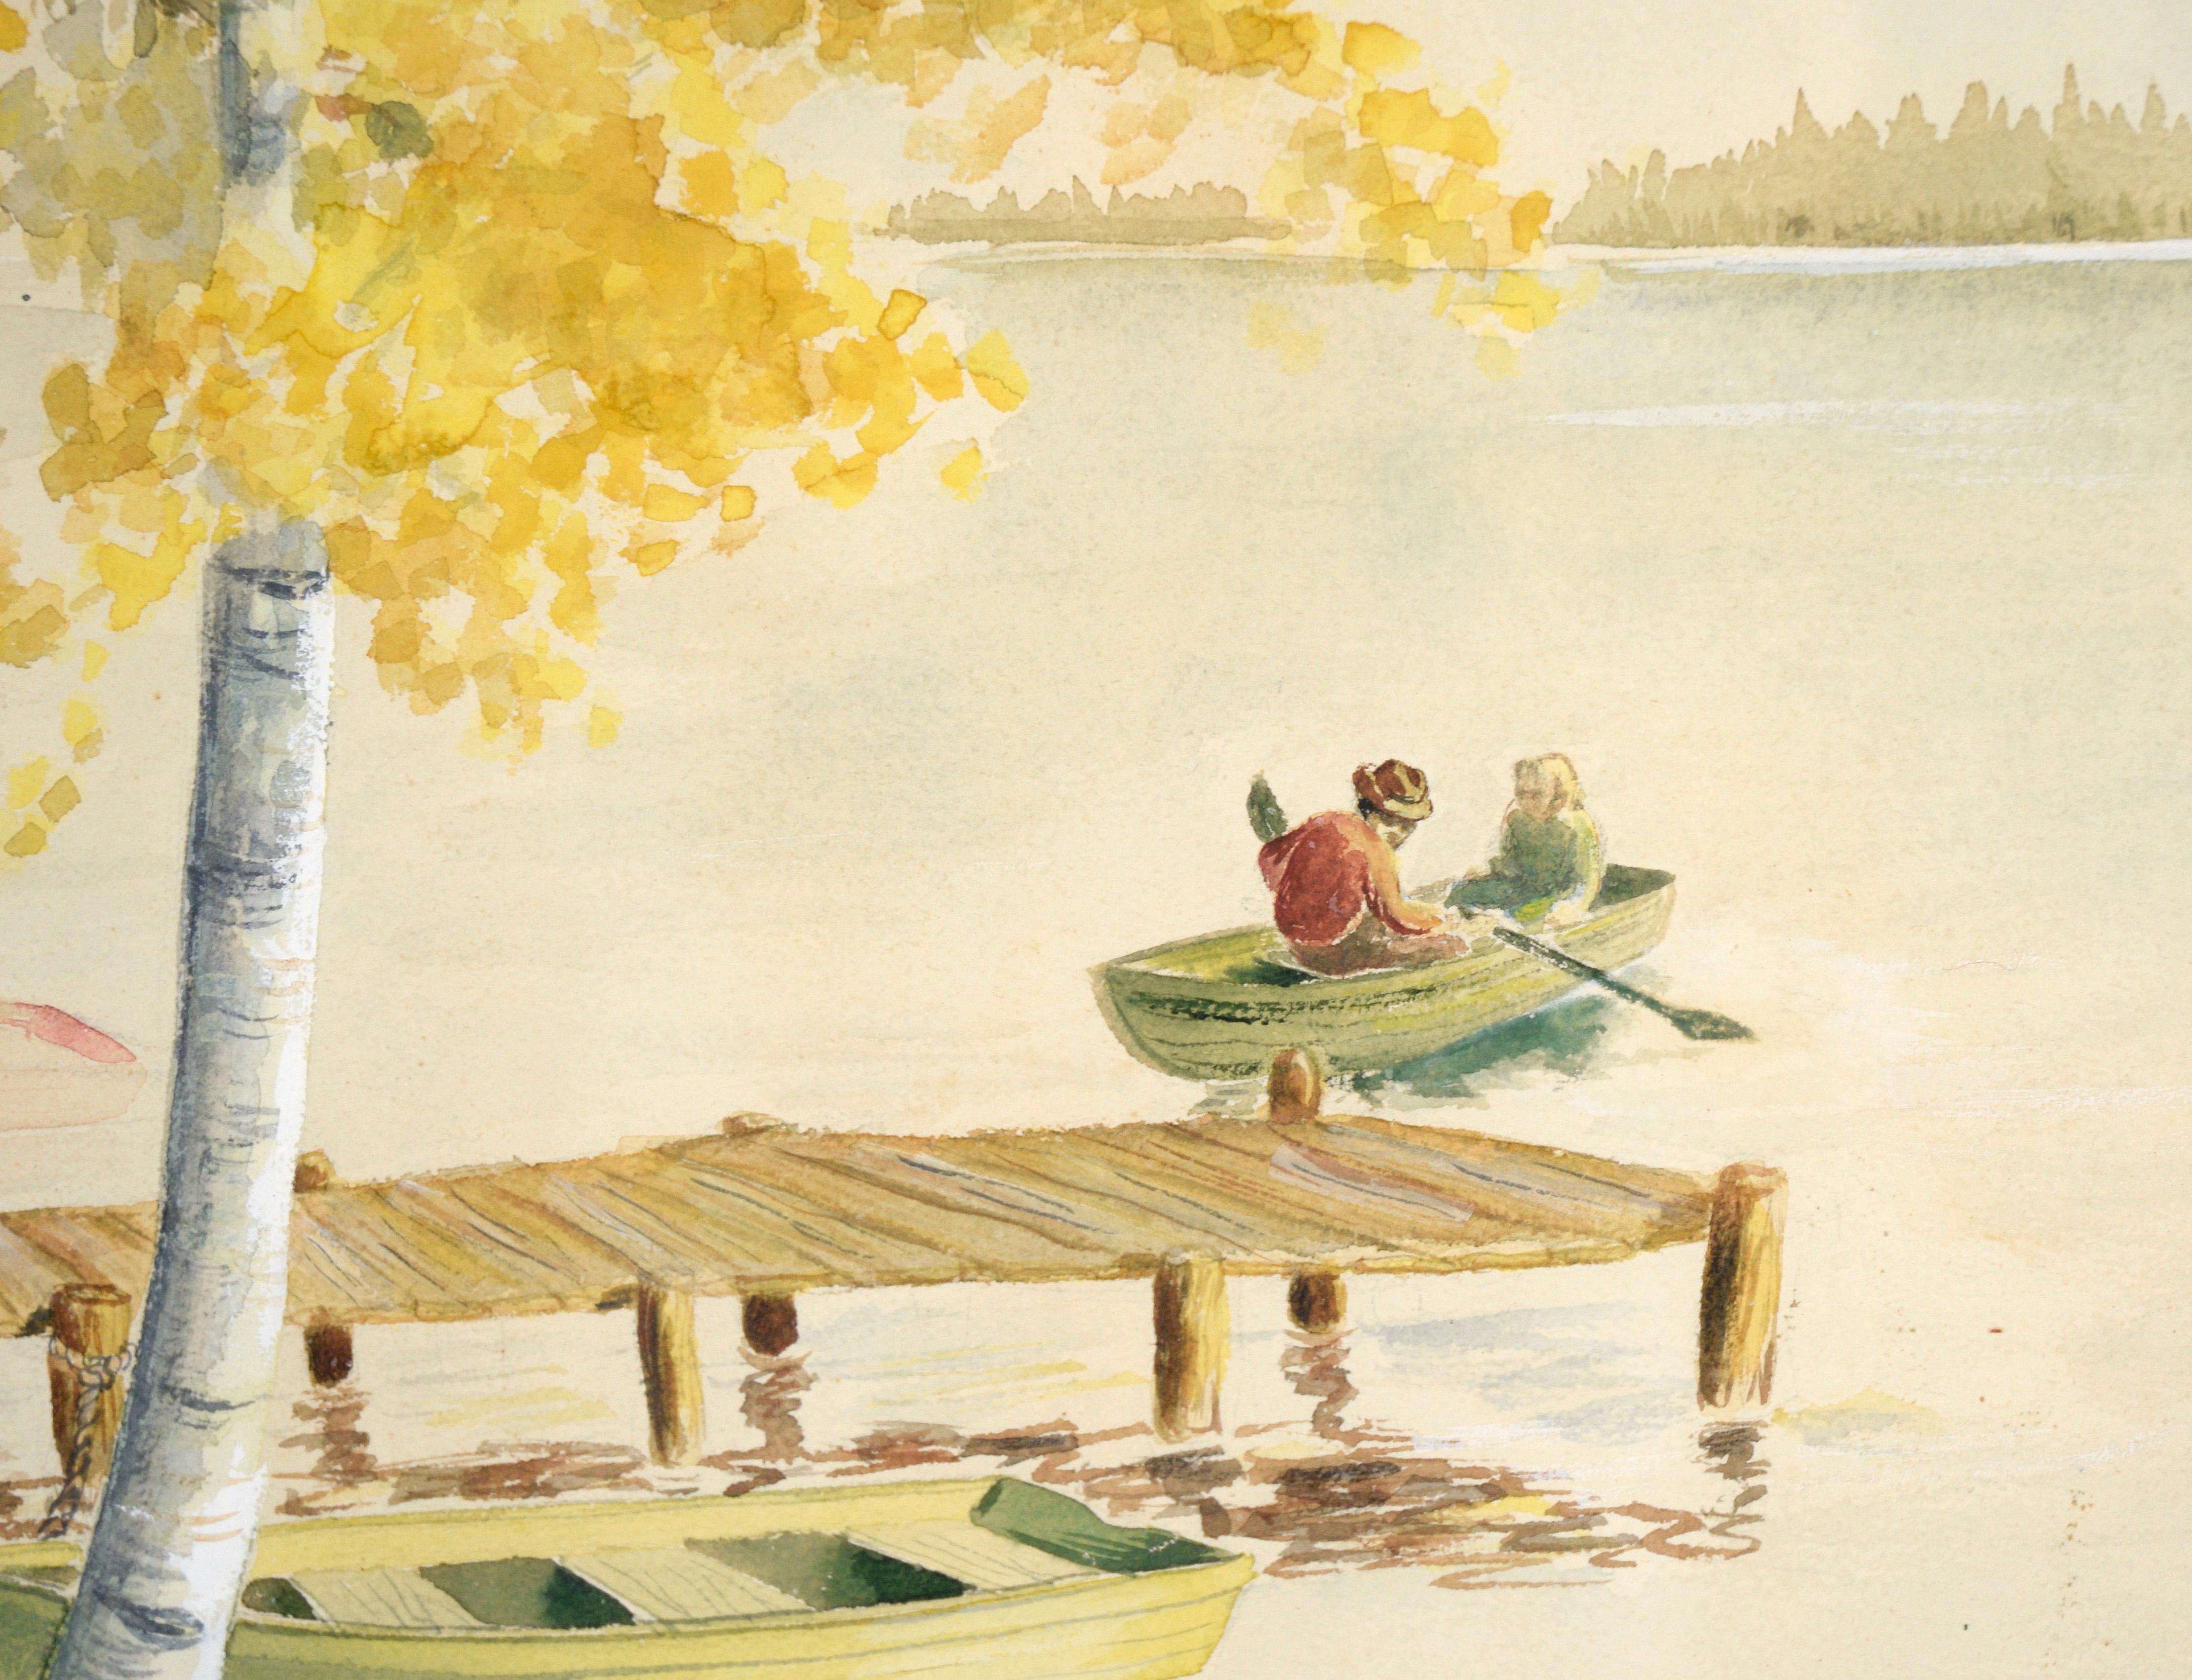 Rowboat Outing - Fall Landscape with Rowboats in Watercolor on Paper

Serene lakeside landscape by an unknown artist (20th Century). Two birch trees with bright yellow leaves are growing at the edge of the lake. In the lake, a rowboat with two